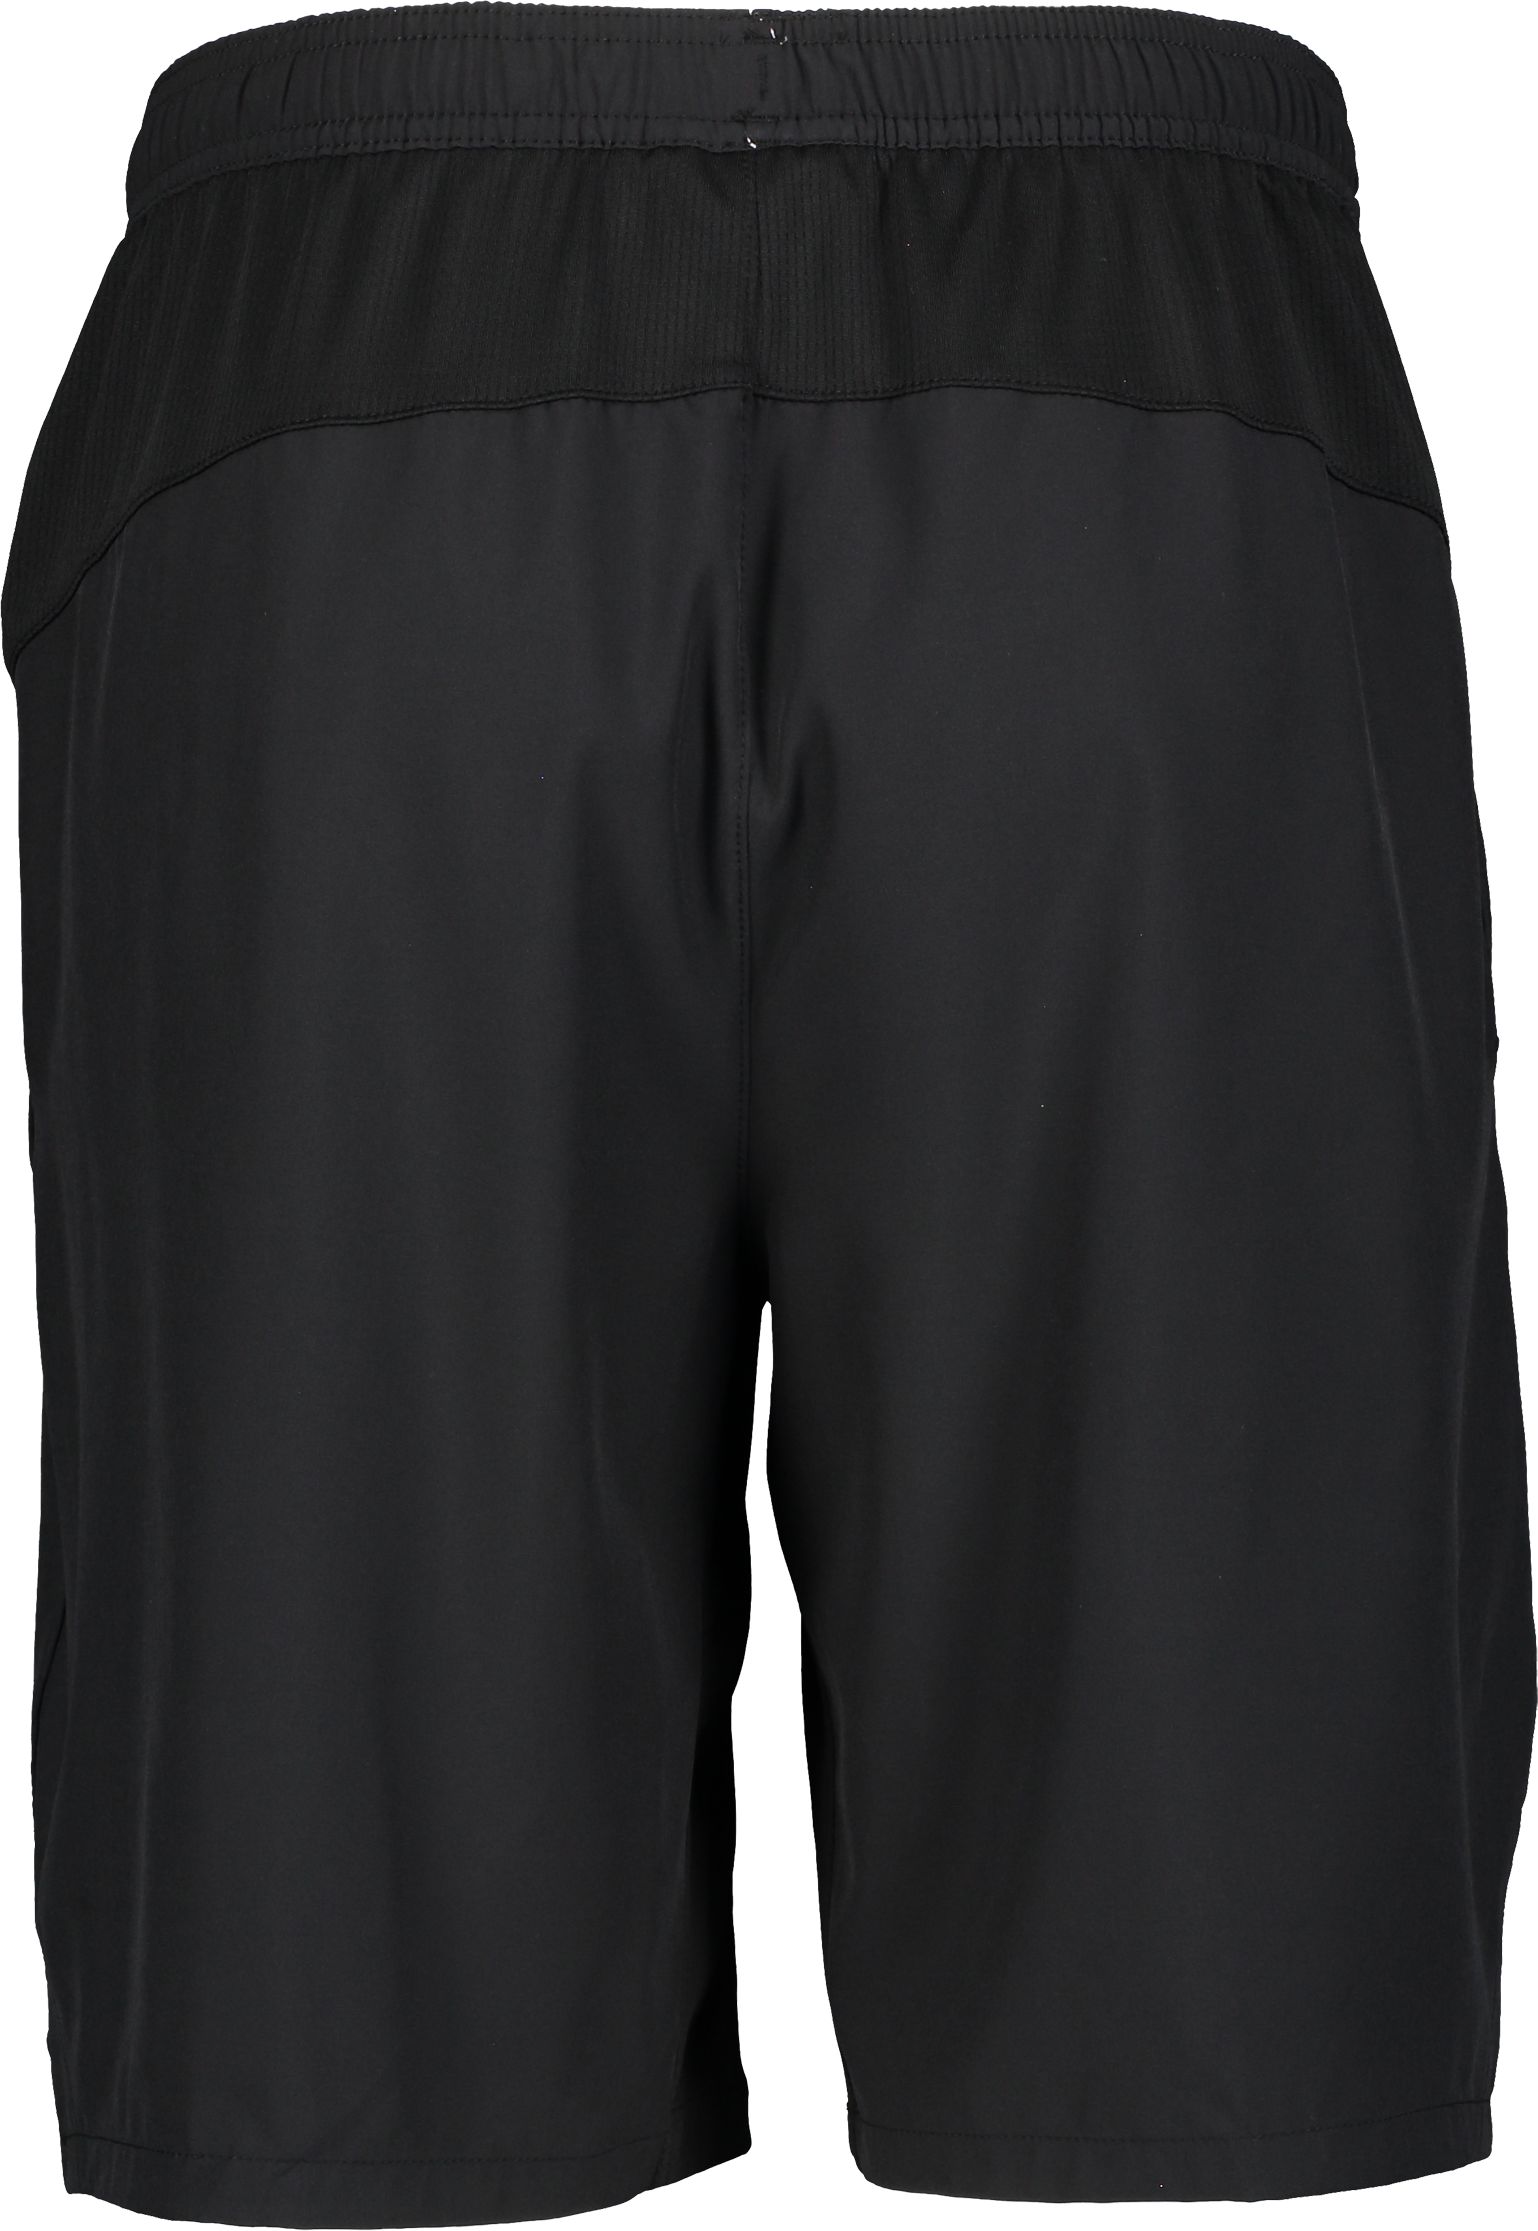 FATPIPE, OLSEN TRG SHORTS